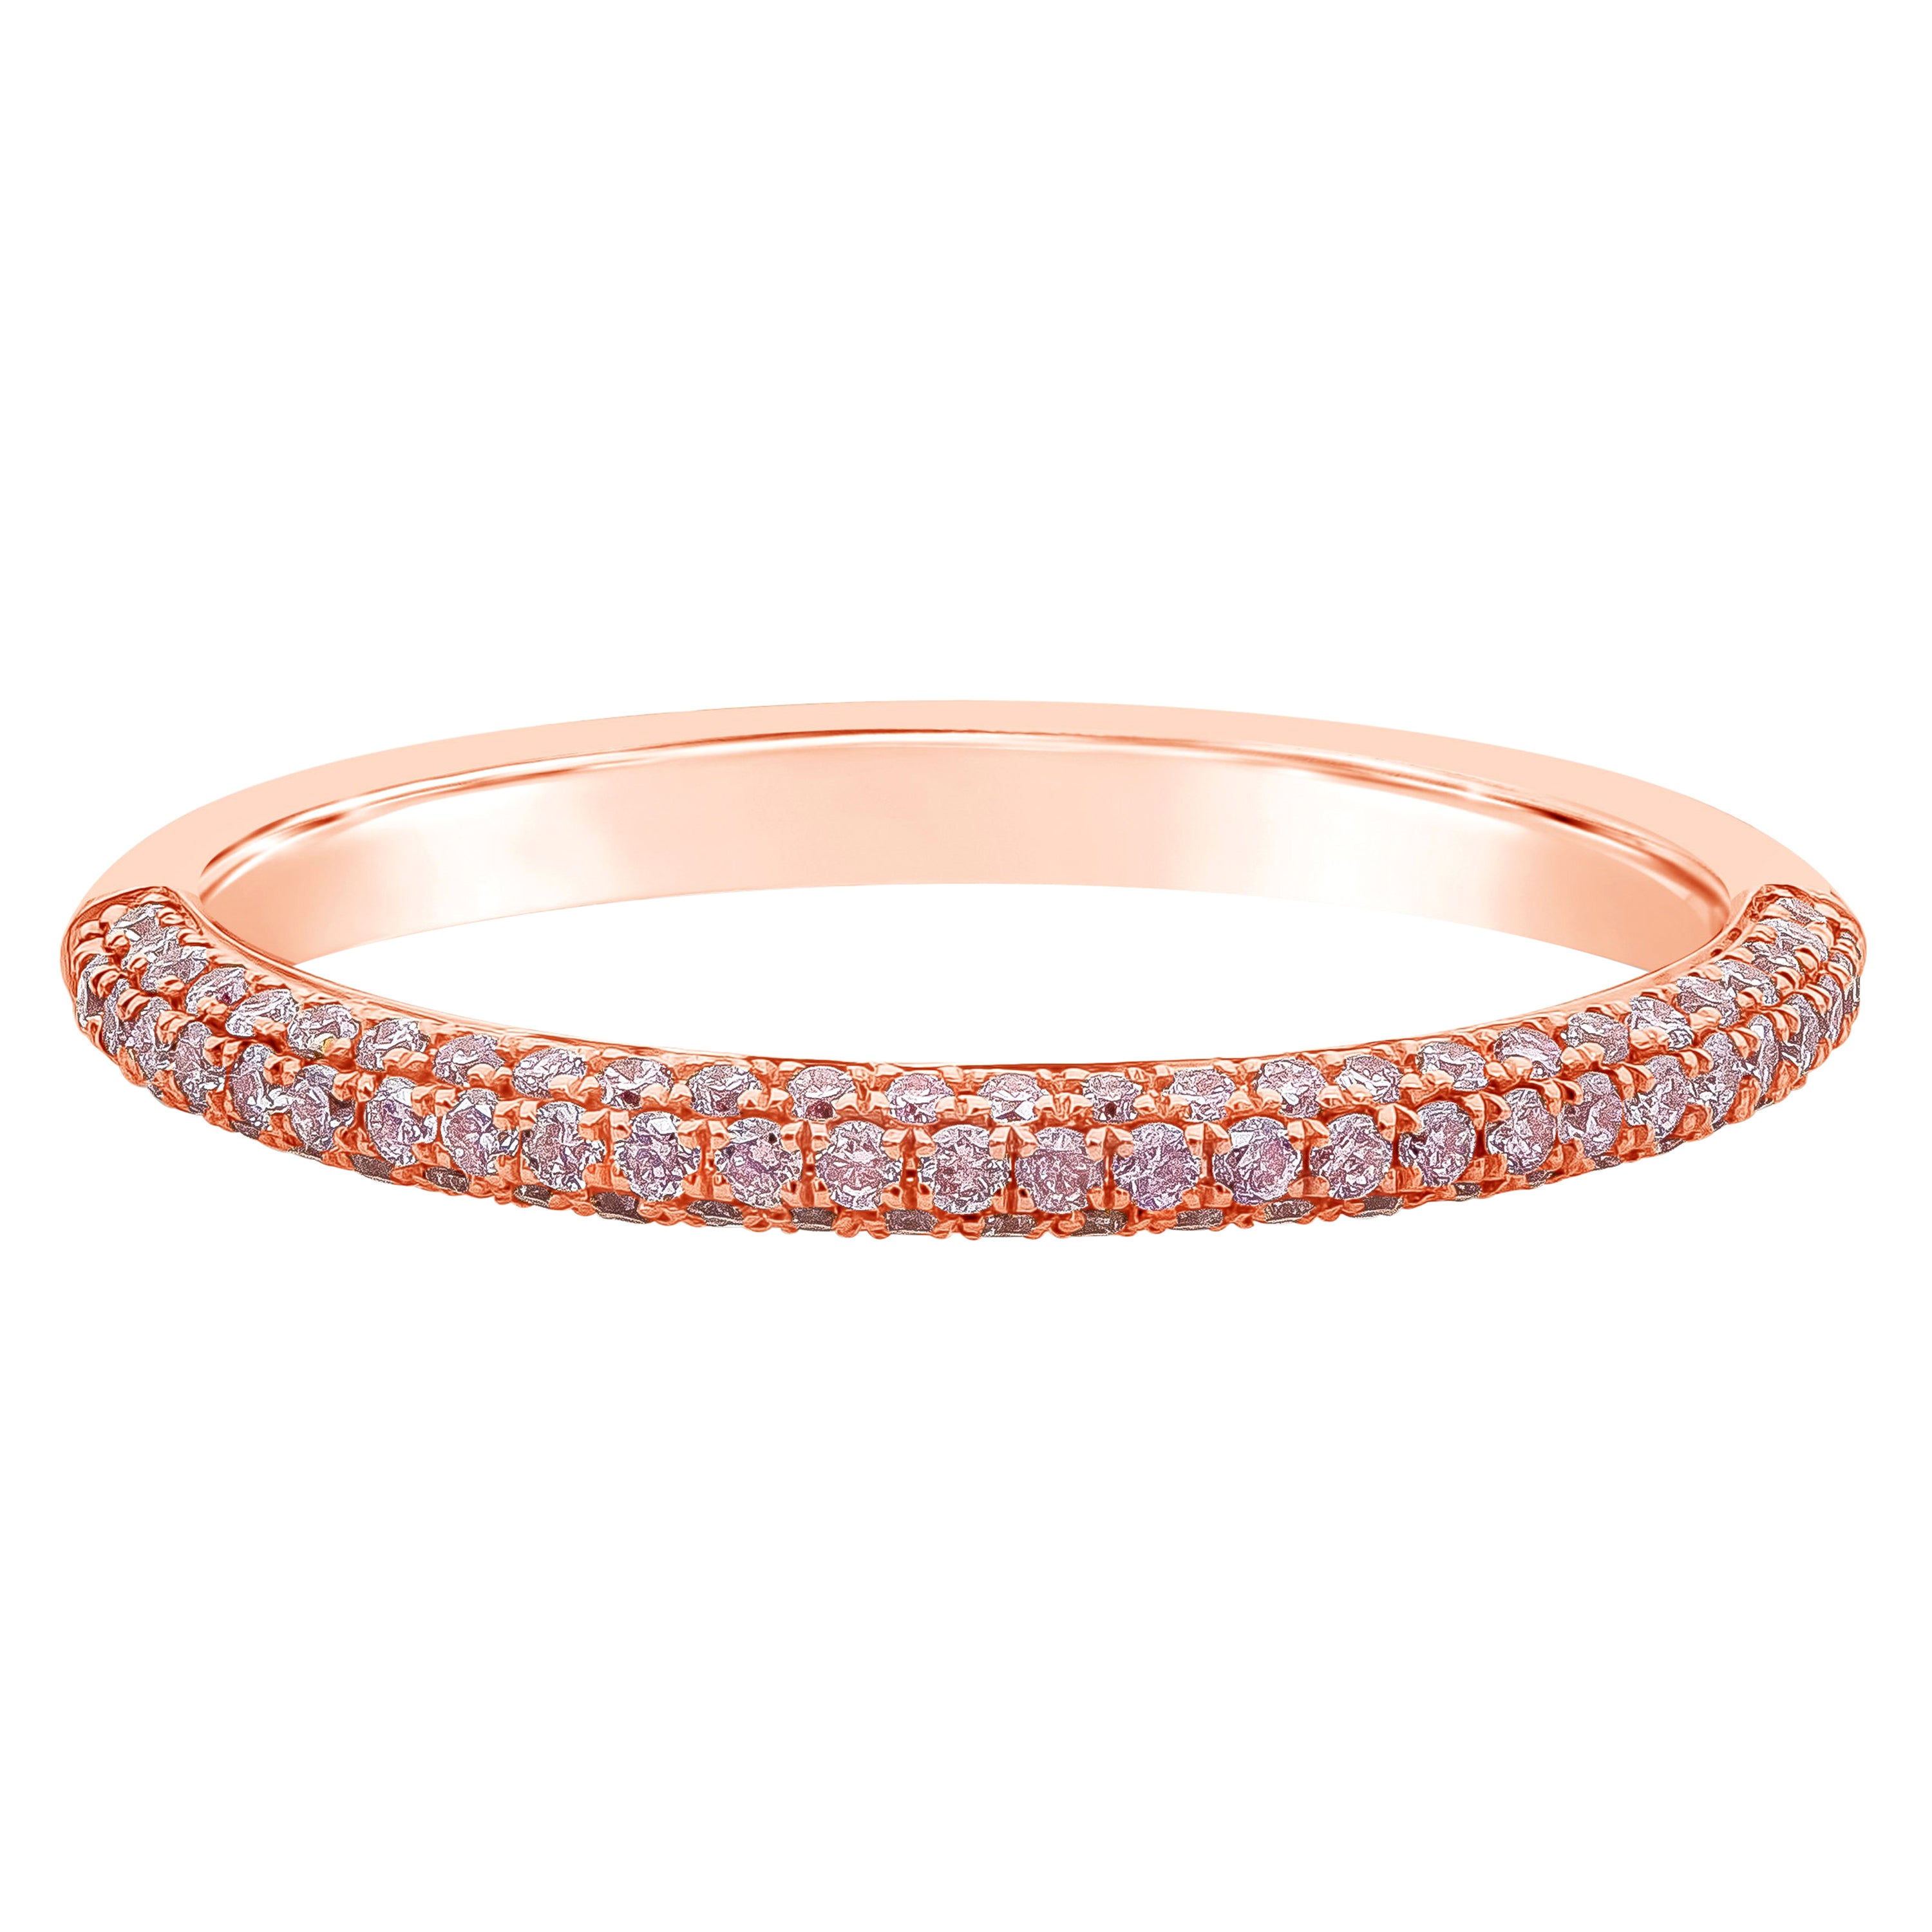 Fancy Pink Diamond in Rose Gold Wedding Band